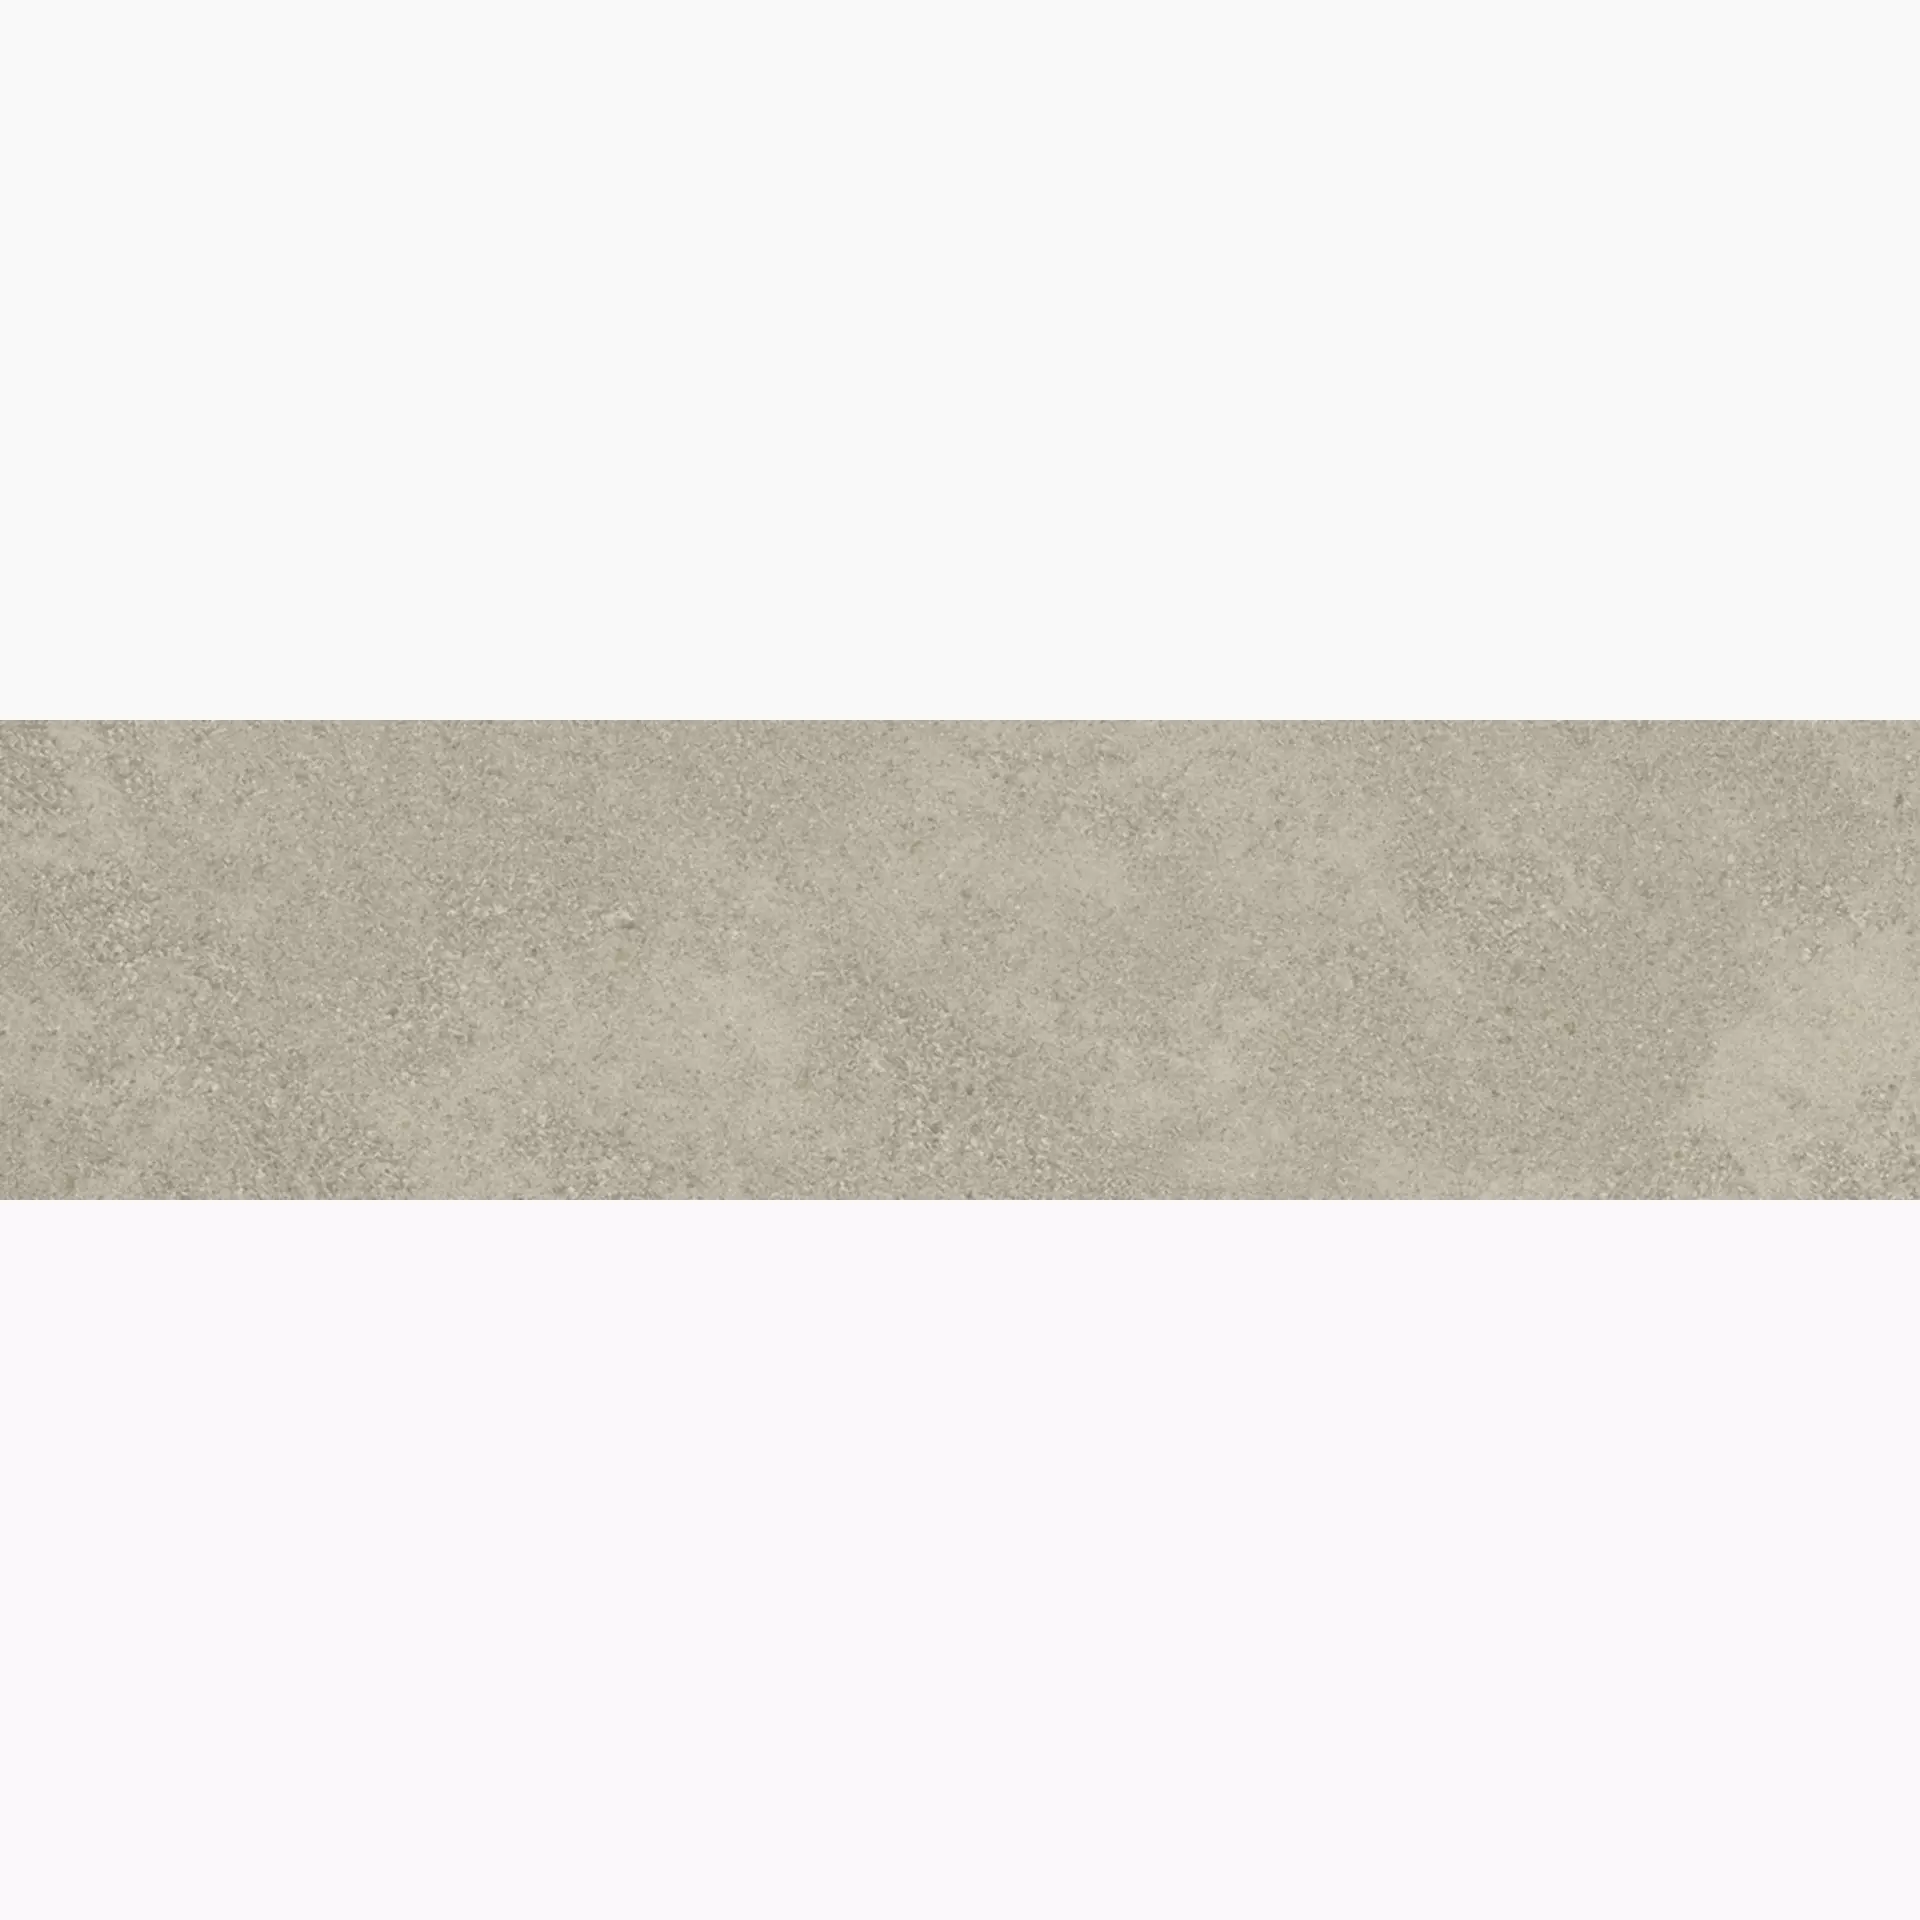 FMG Pietre Trax Greige Naturale P623386 30x120cm rectified 10mm